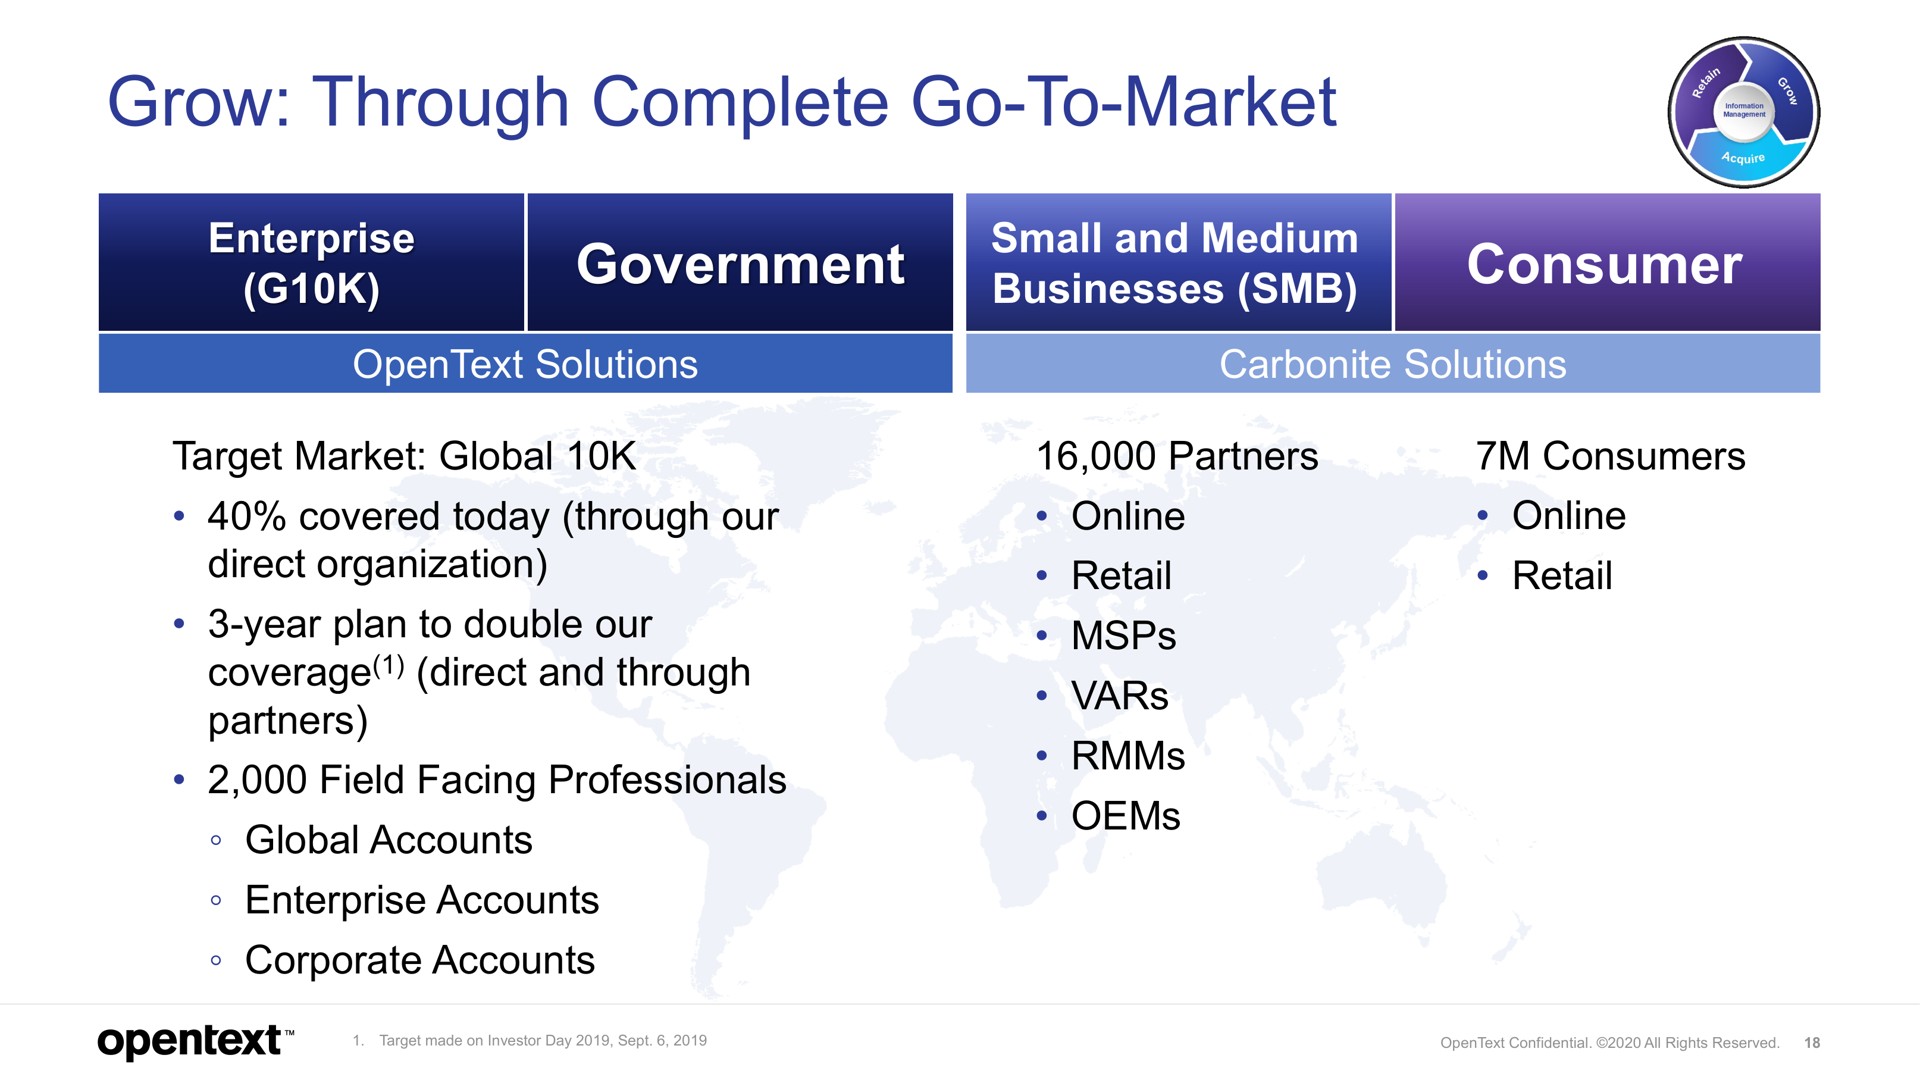 grow through complete go to market businesses | OpenText